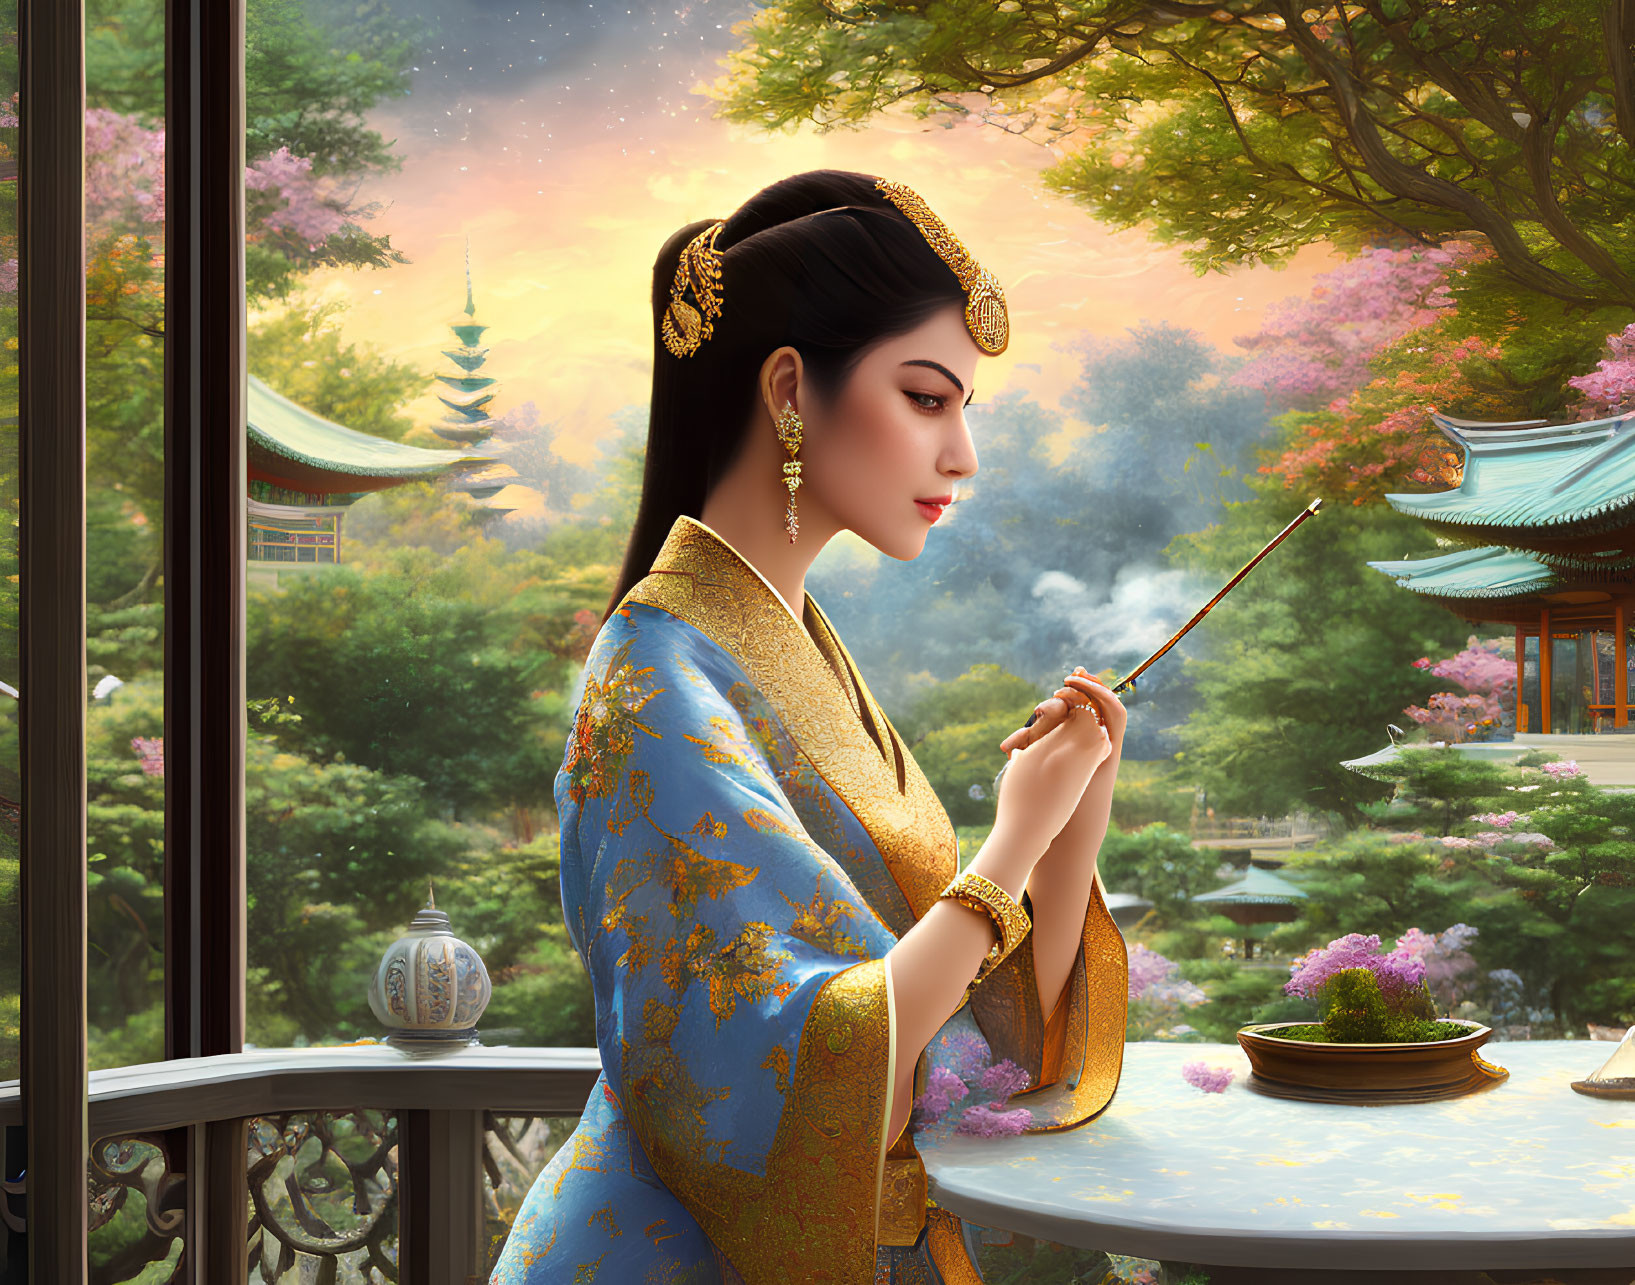 Traditional East Asian attire woman with brush near window in serene garden.